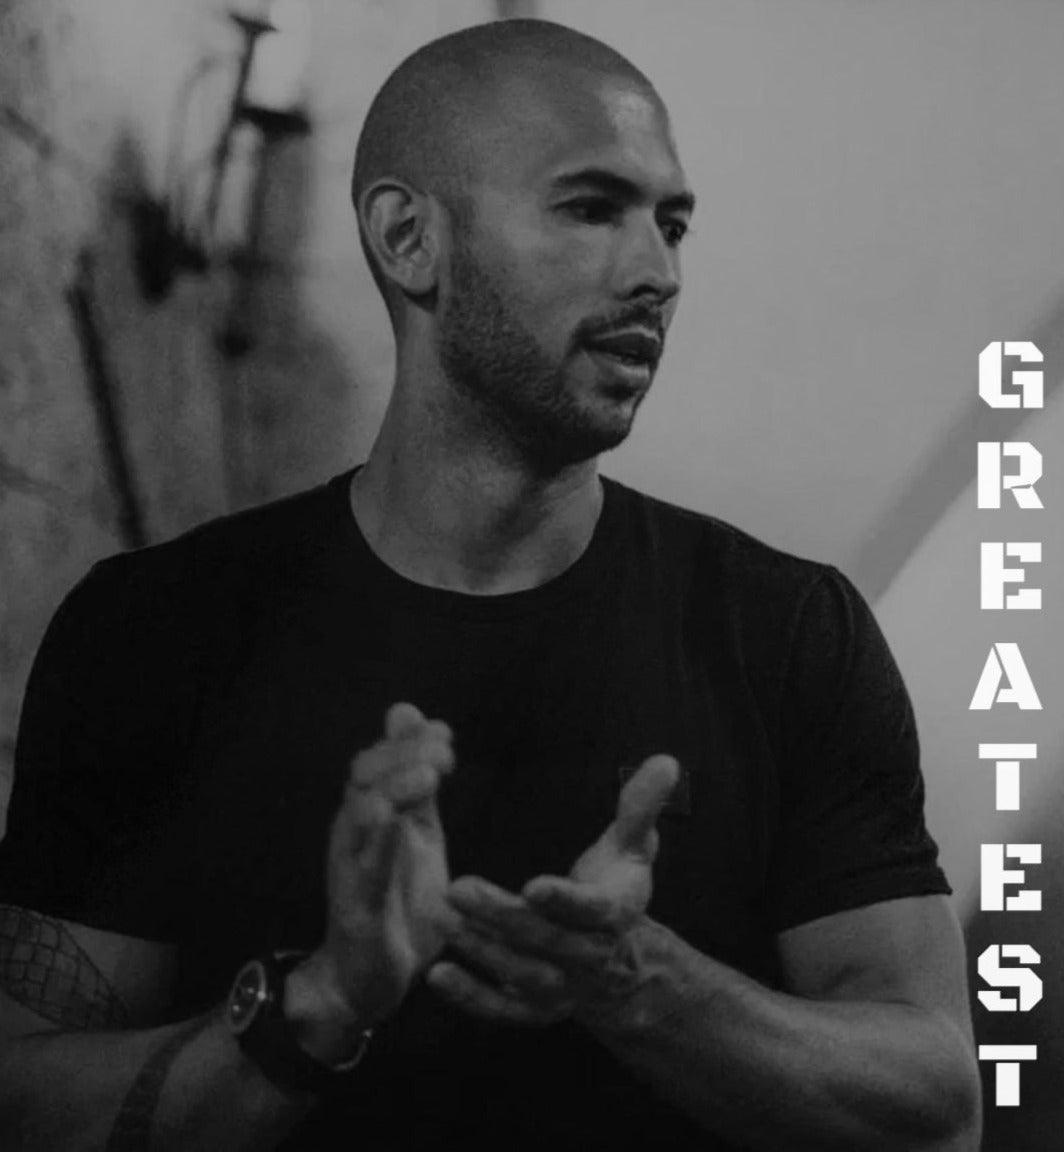 Stay motivated to achieve greatness with an Andrew Tate motivational poster featuring the quote 'Greatest.' Available worldwide in various sizes and at affordable prices.